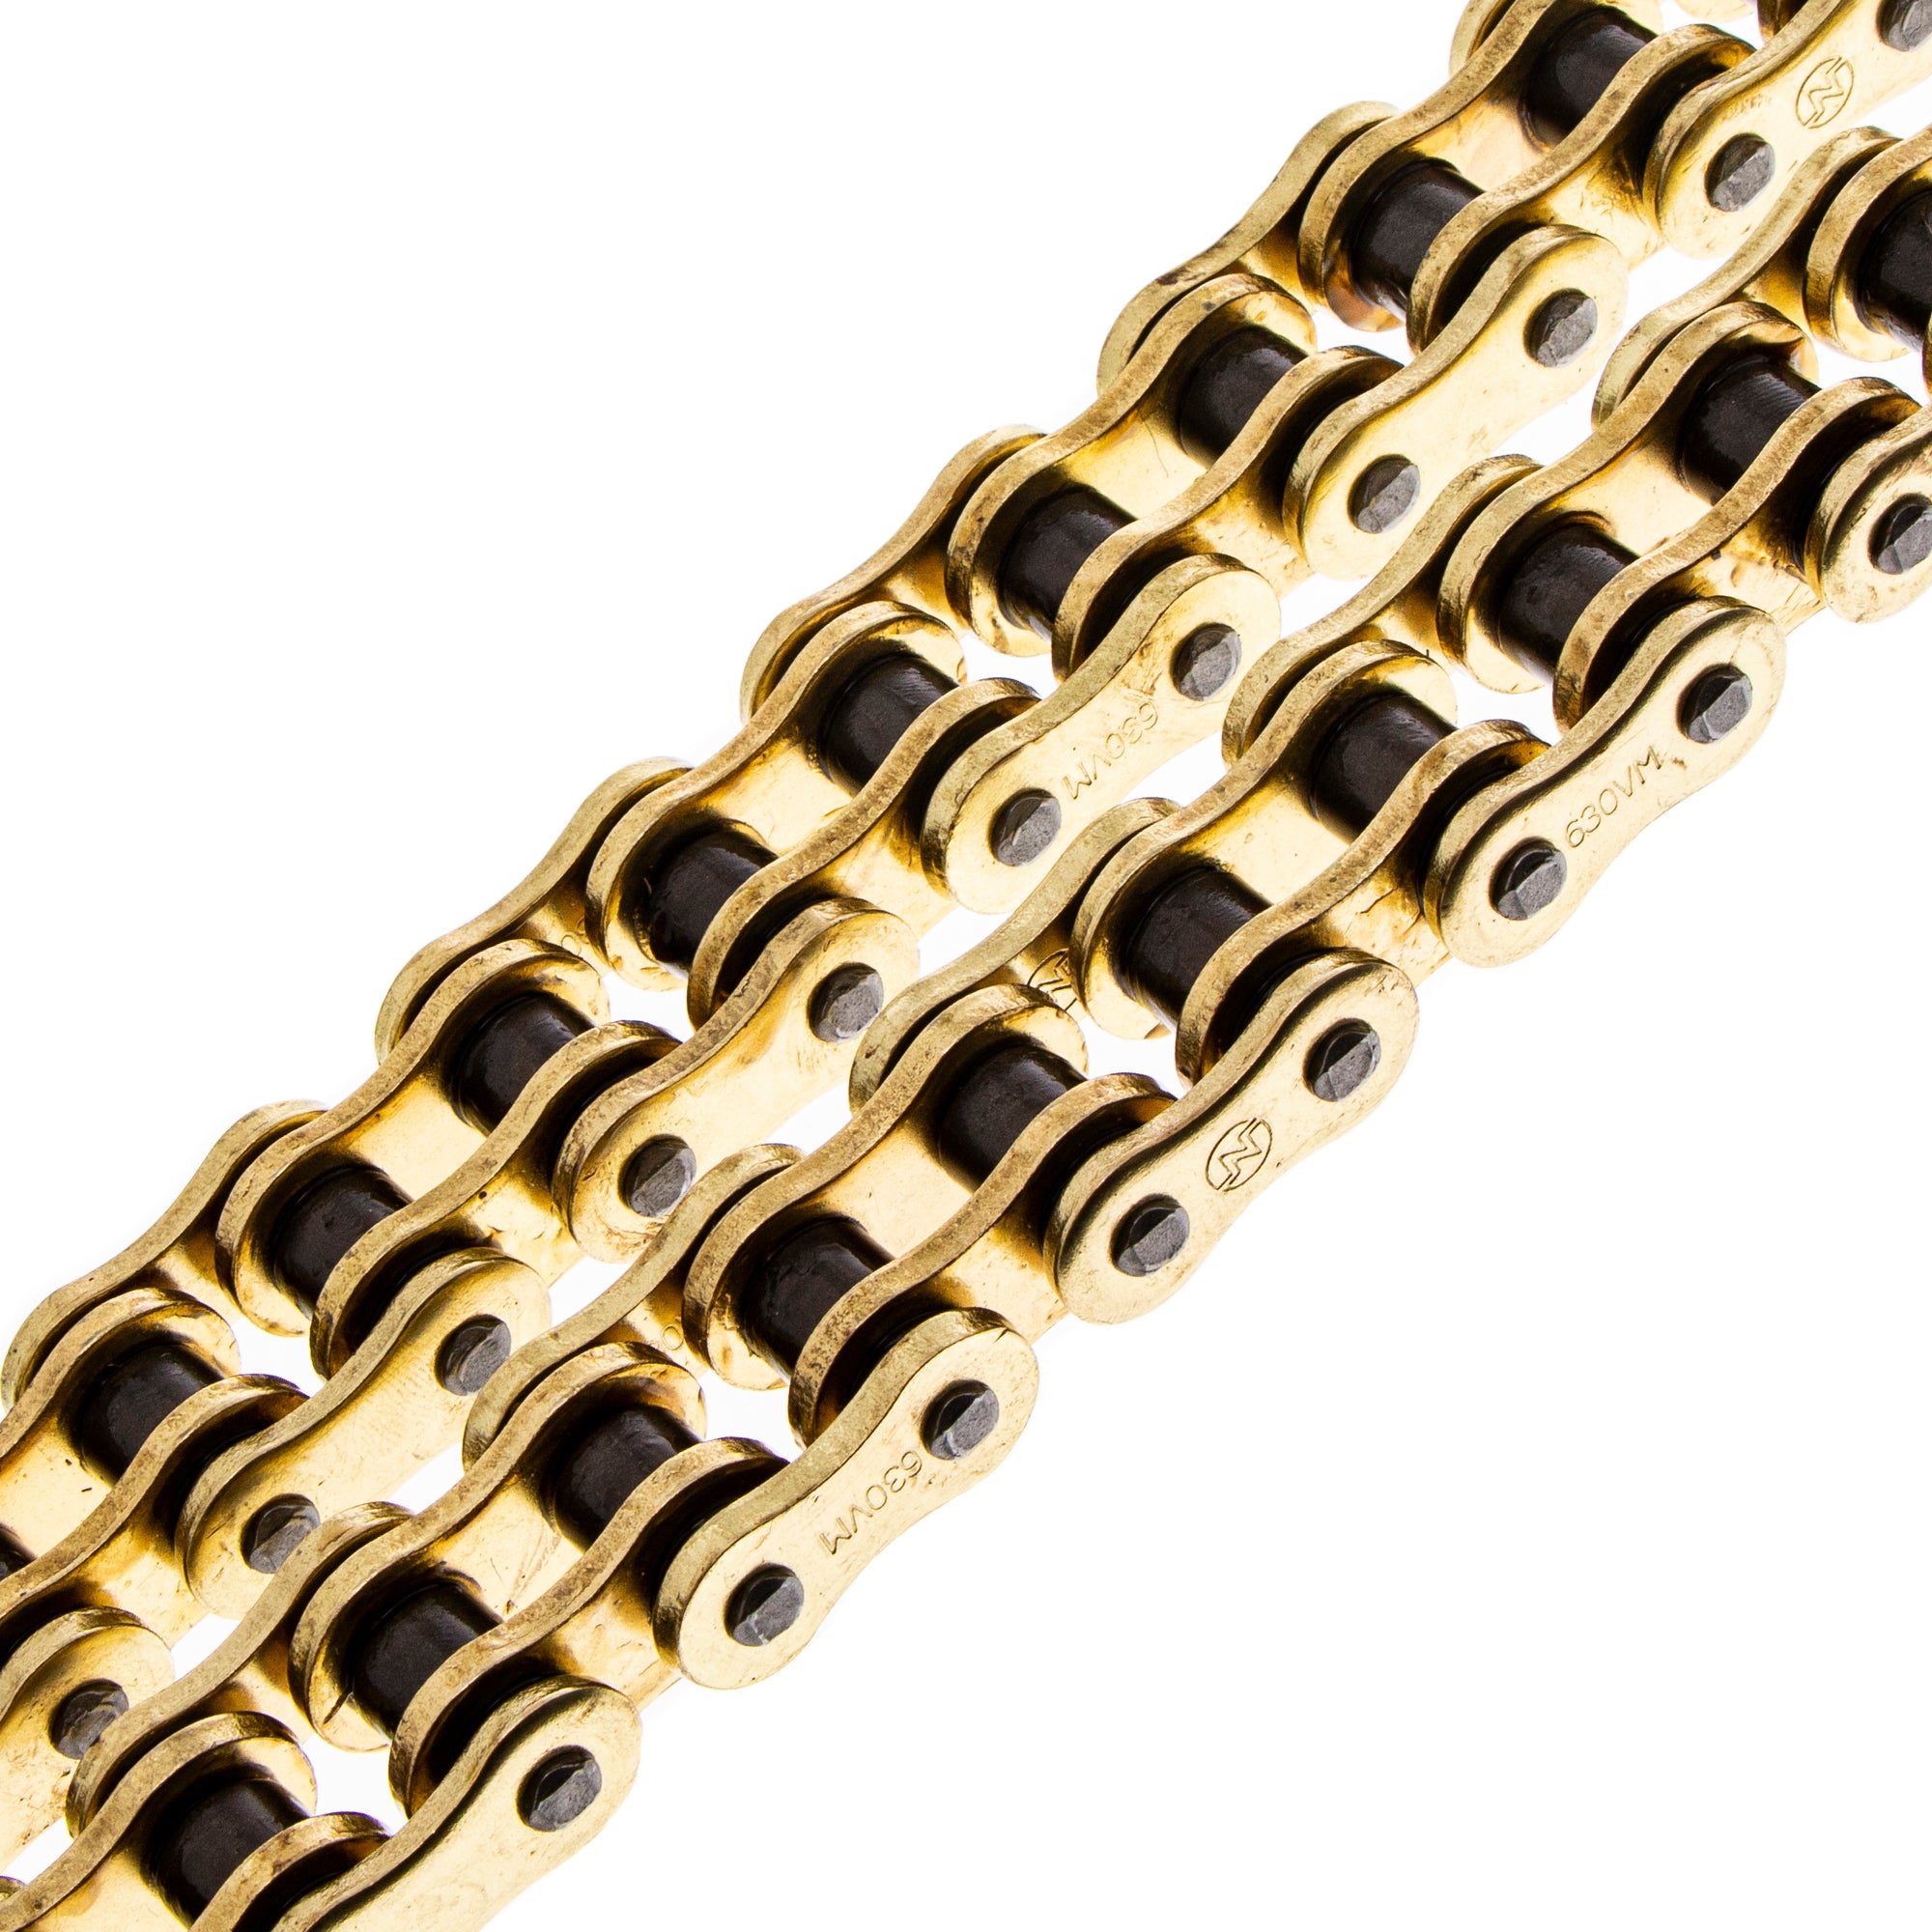 Gold X-Ring Chain 88 w/ Master Link for zOTHER Super KZ750L KZ700A Hondamatic 5465 NICHE 519-CDC2576H